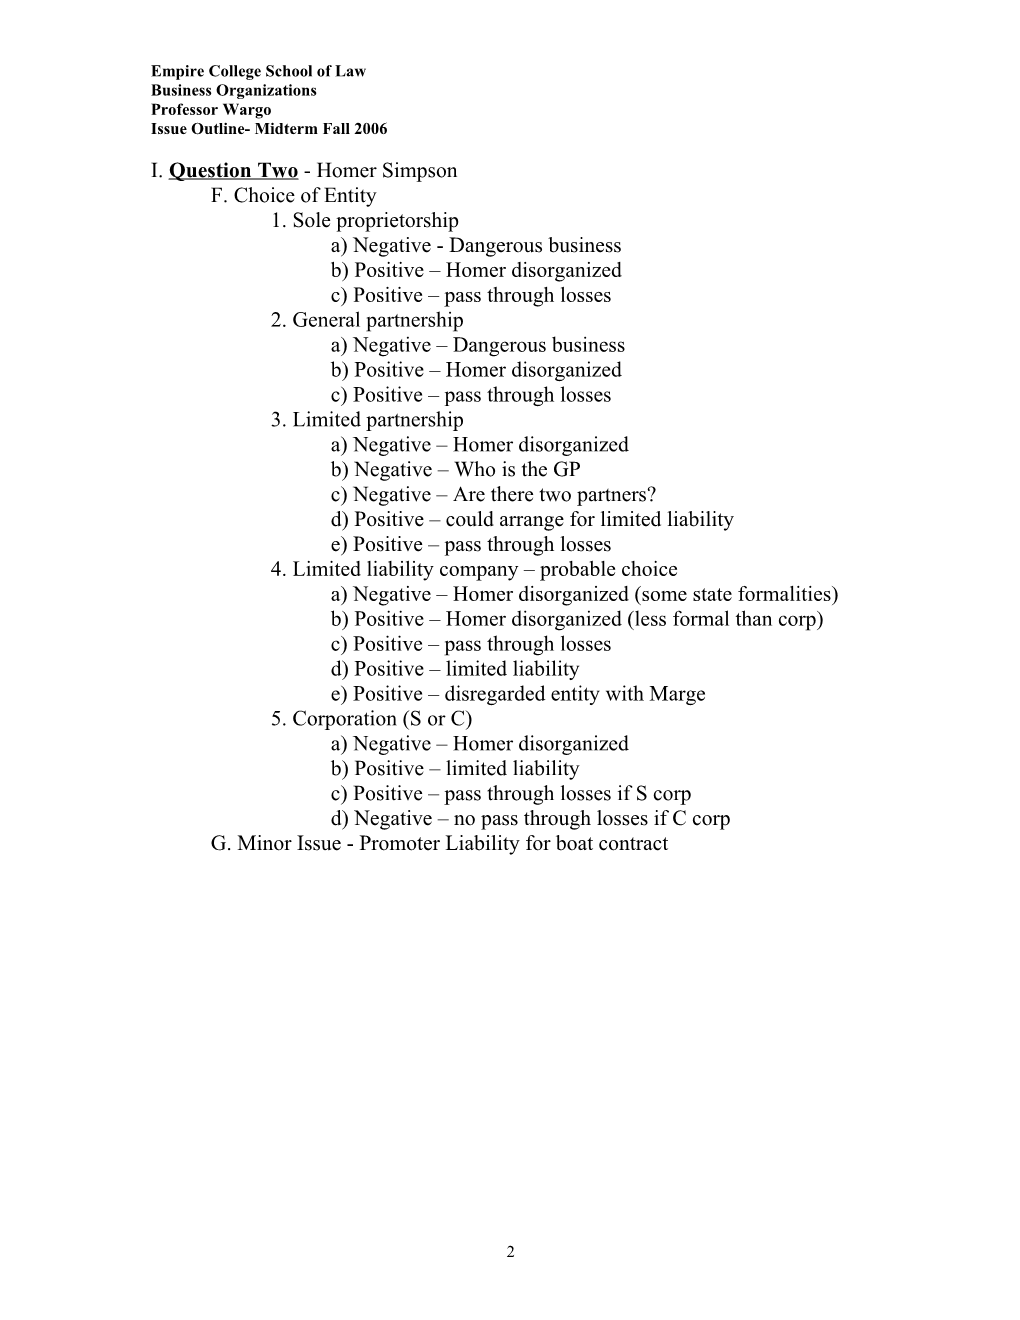 2006 Fall Business Organizations Midterm Issue Outline (00040040)